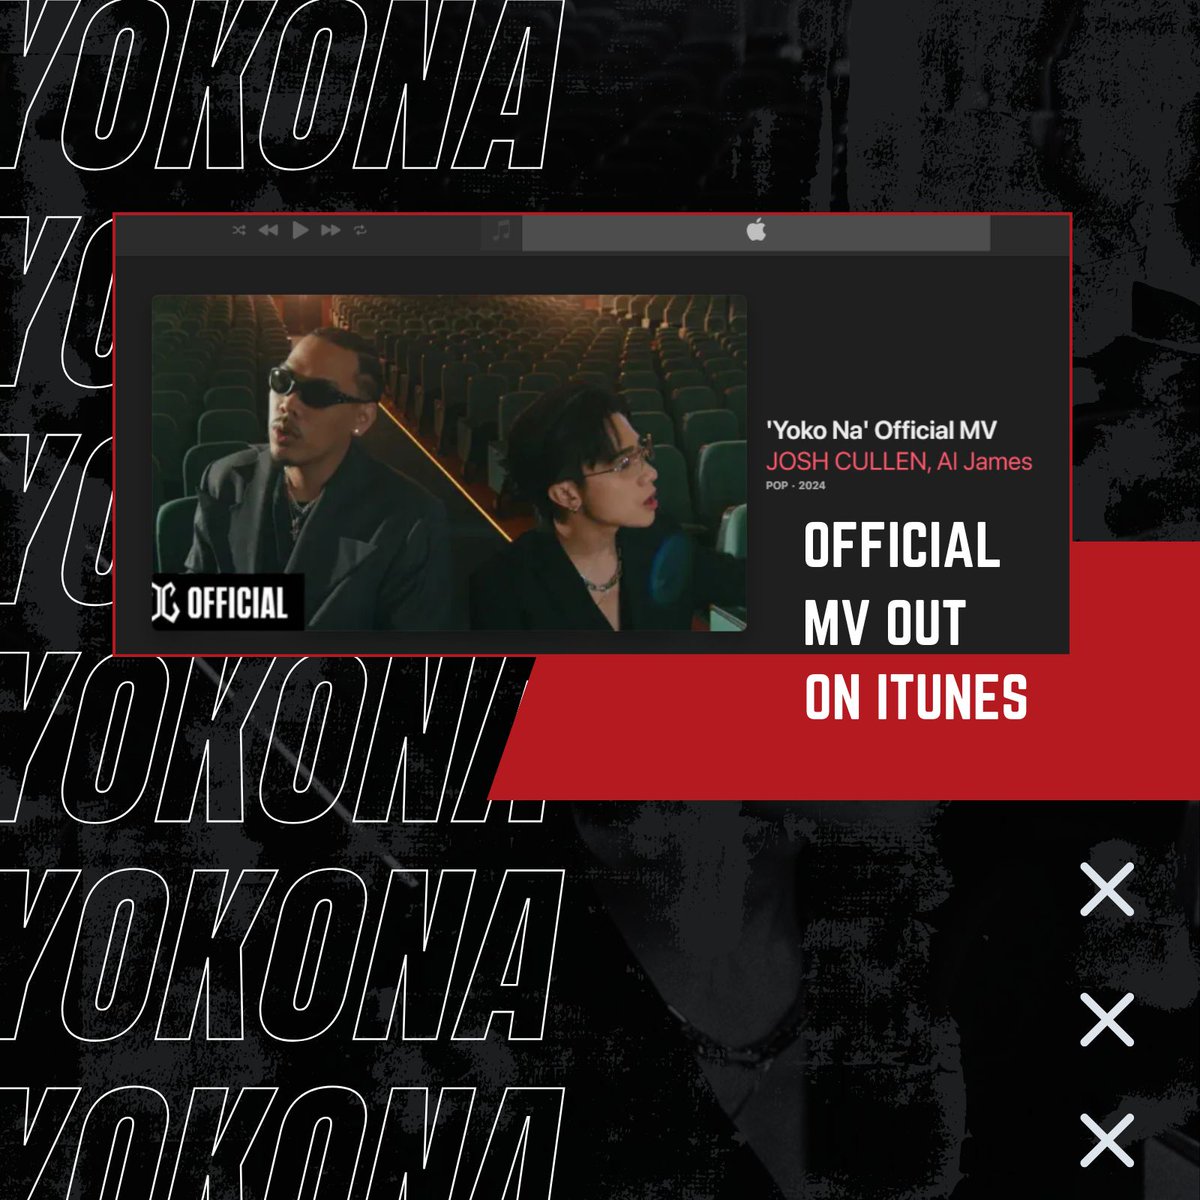 Here's another way we can support Josh, the #YokoNa Official MV by #JOSHCULLENxALJAMES is now available on iTunes for purchase.

🔗  buff.ly/4bmz59J 

ICYMI, the official song is also available on iTunes along with the rest of #JOSHCULLEN's discography.